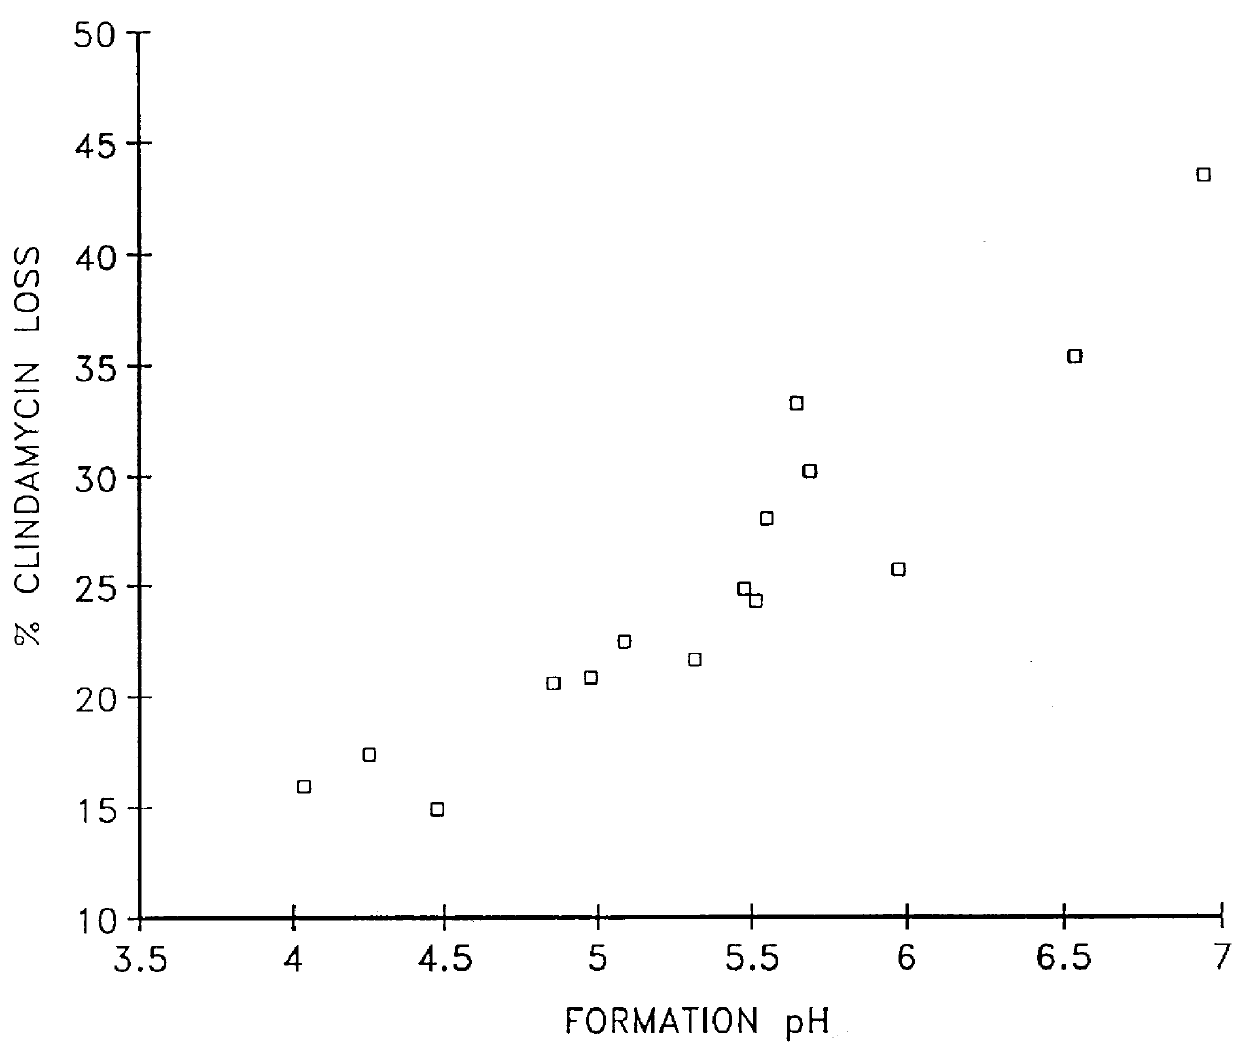 Compositions for the treatment of acne containing clindamycin and benzoyl peroxide